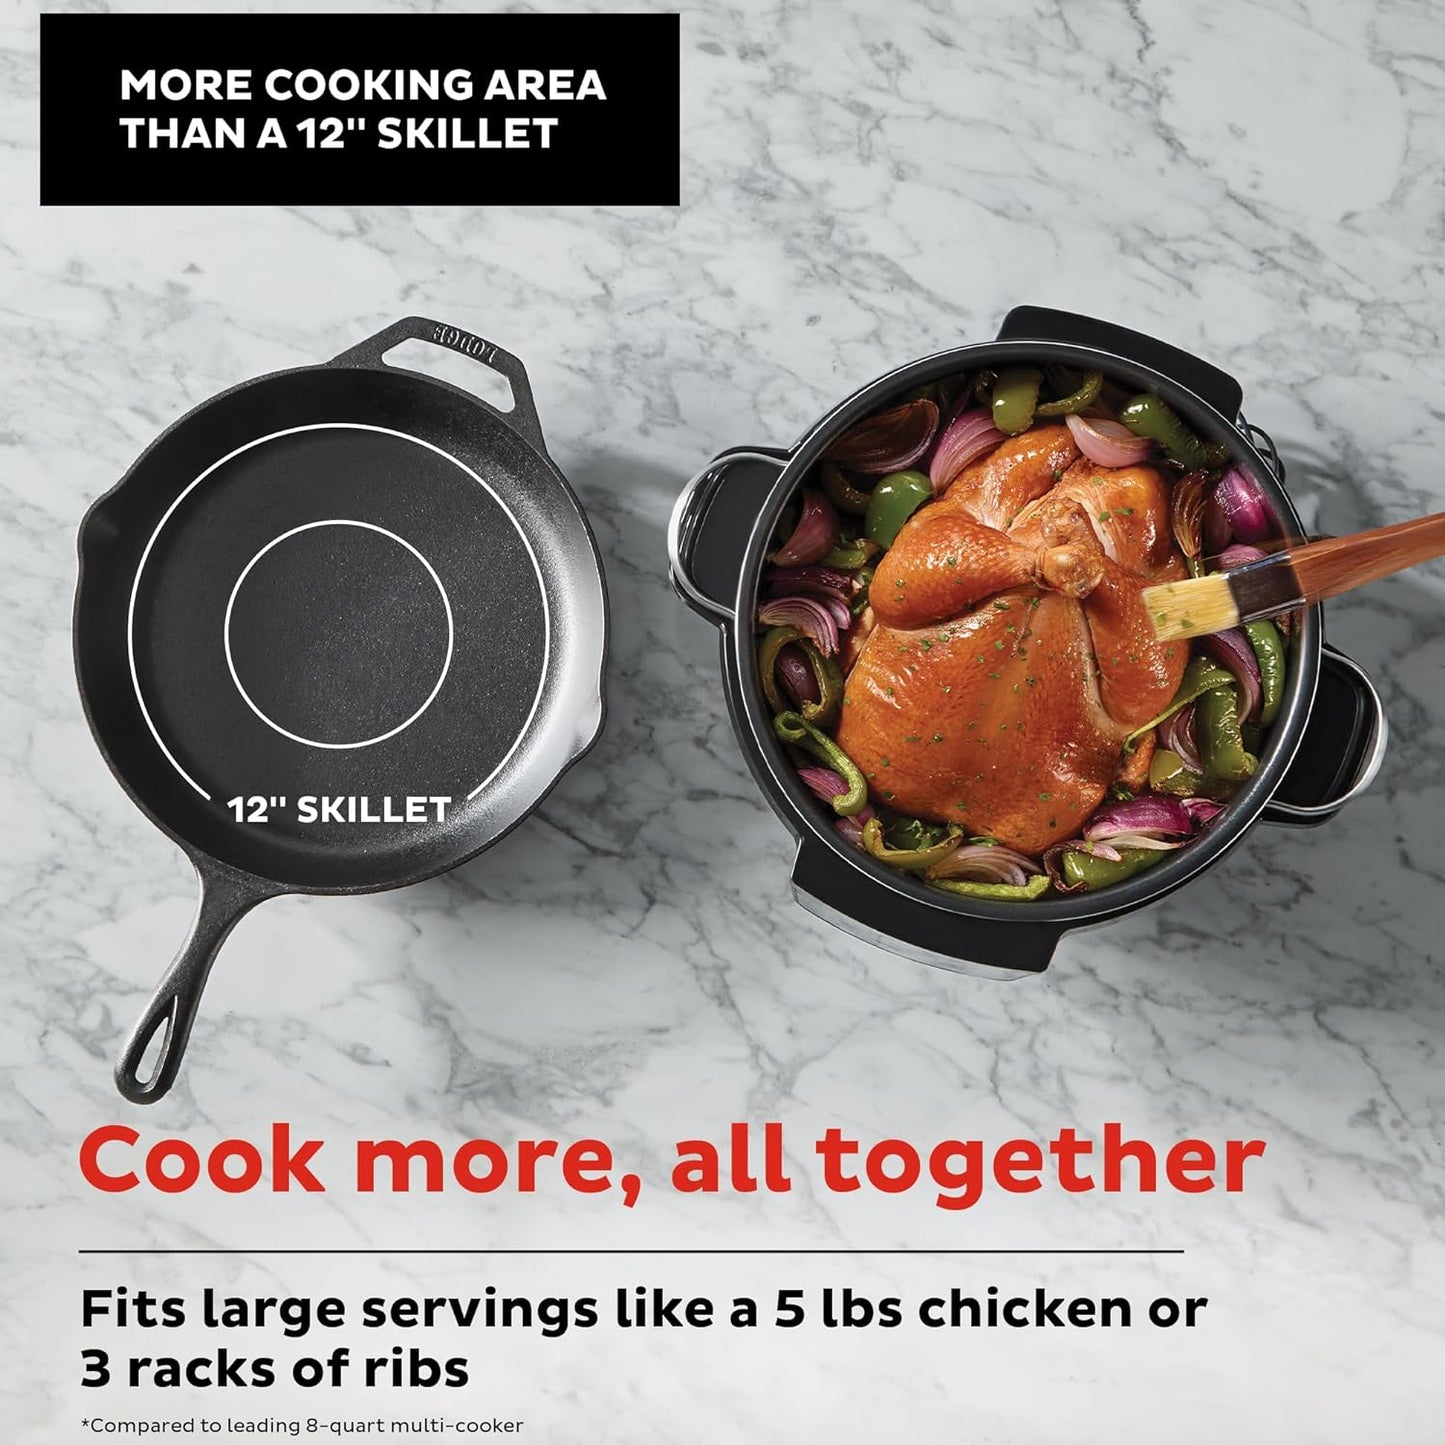 Instant Superior Cooker 7.5QT Slow Cooker and Multicooker, 4-in-1 Functions, Sears/Sauté, Slow Cooks/Roast, Steams and Warms, From The Makers of Instant Pot